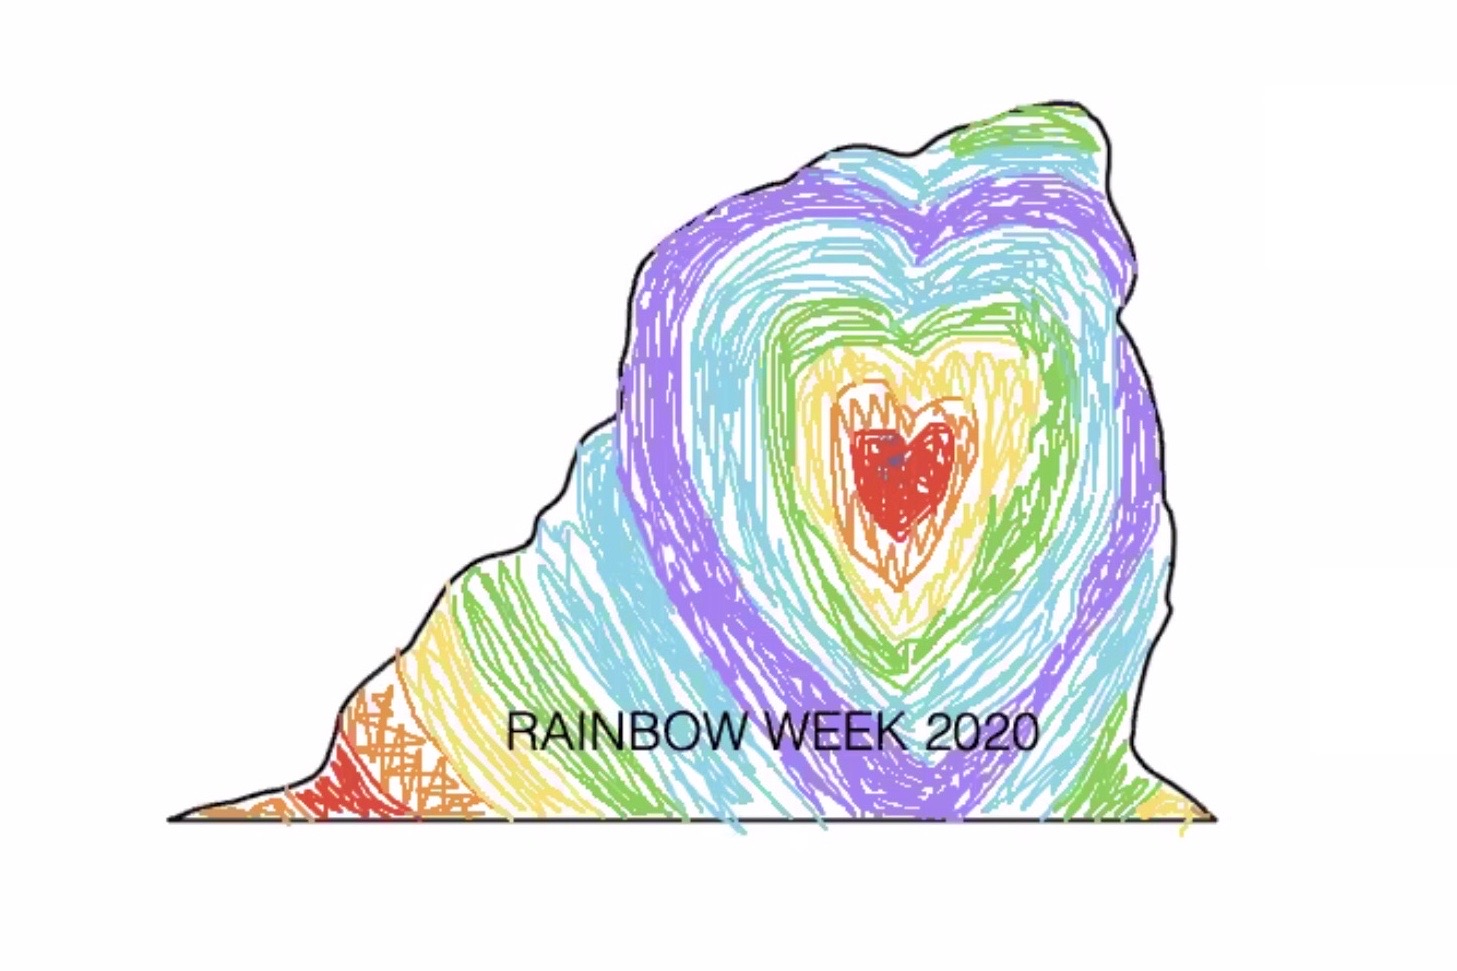 Virtual+painting+of+the+Rock.+Rainbow+Alliance+and+MSA+held+a+virtual+coloring+of+the+Rock+as+a+way+to+continue+the+annual+tradition.+%0A